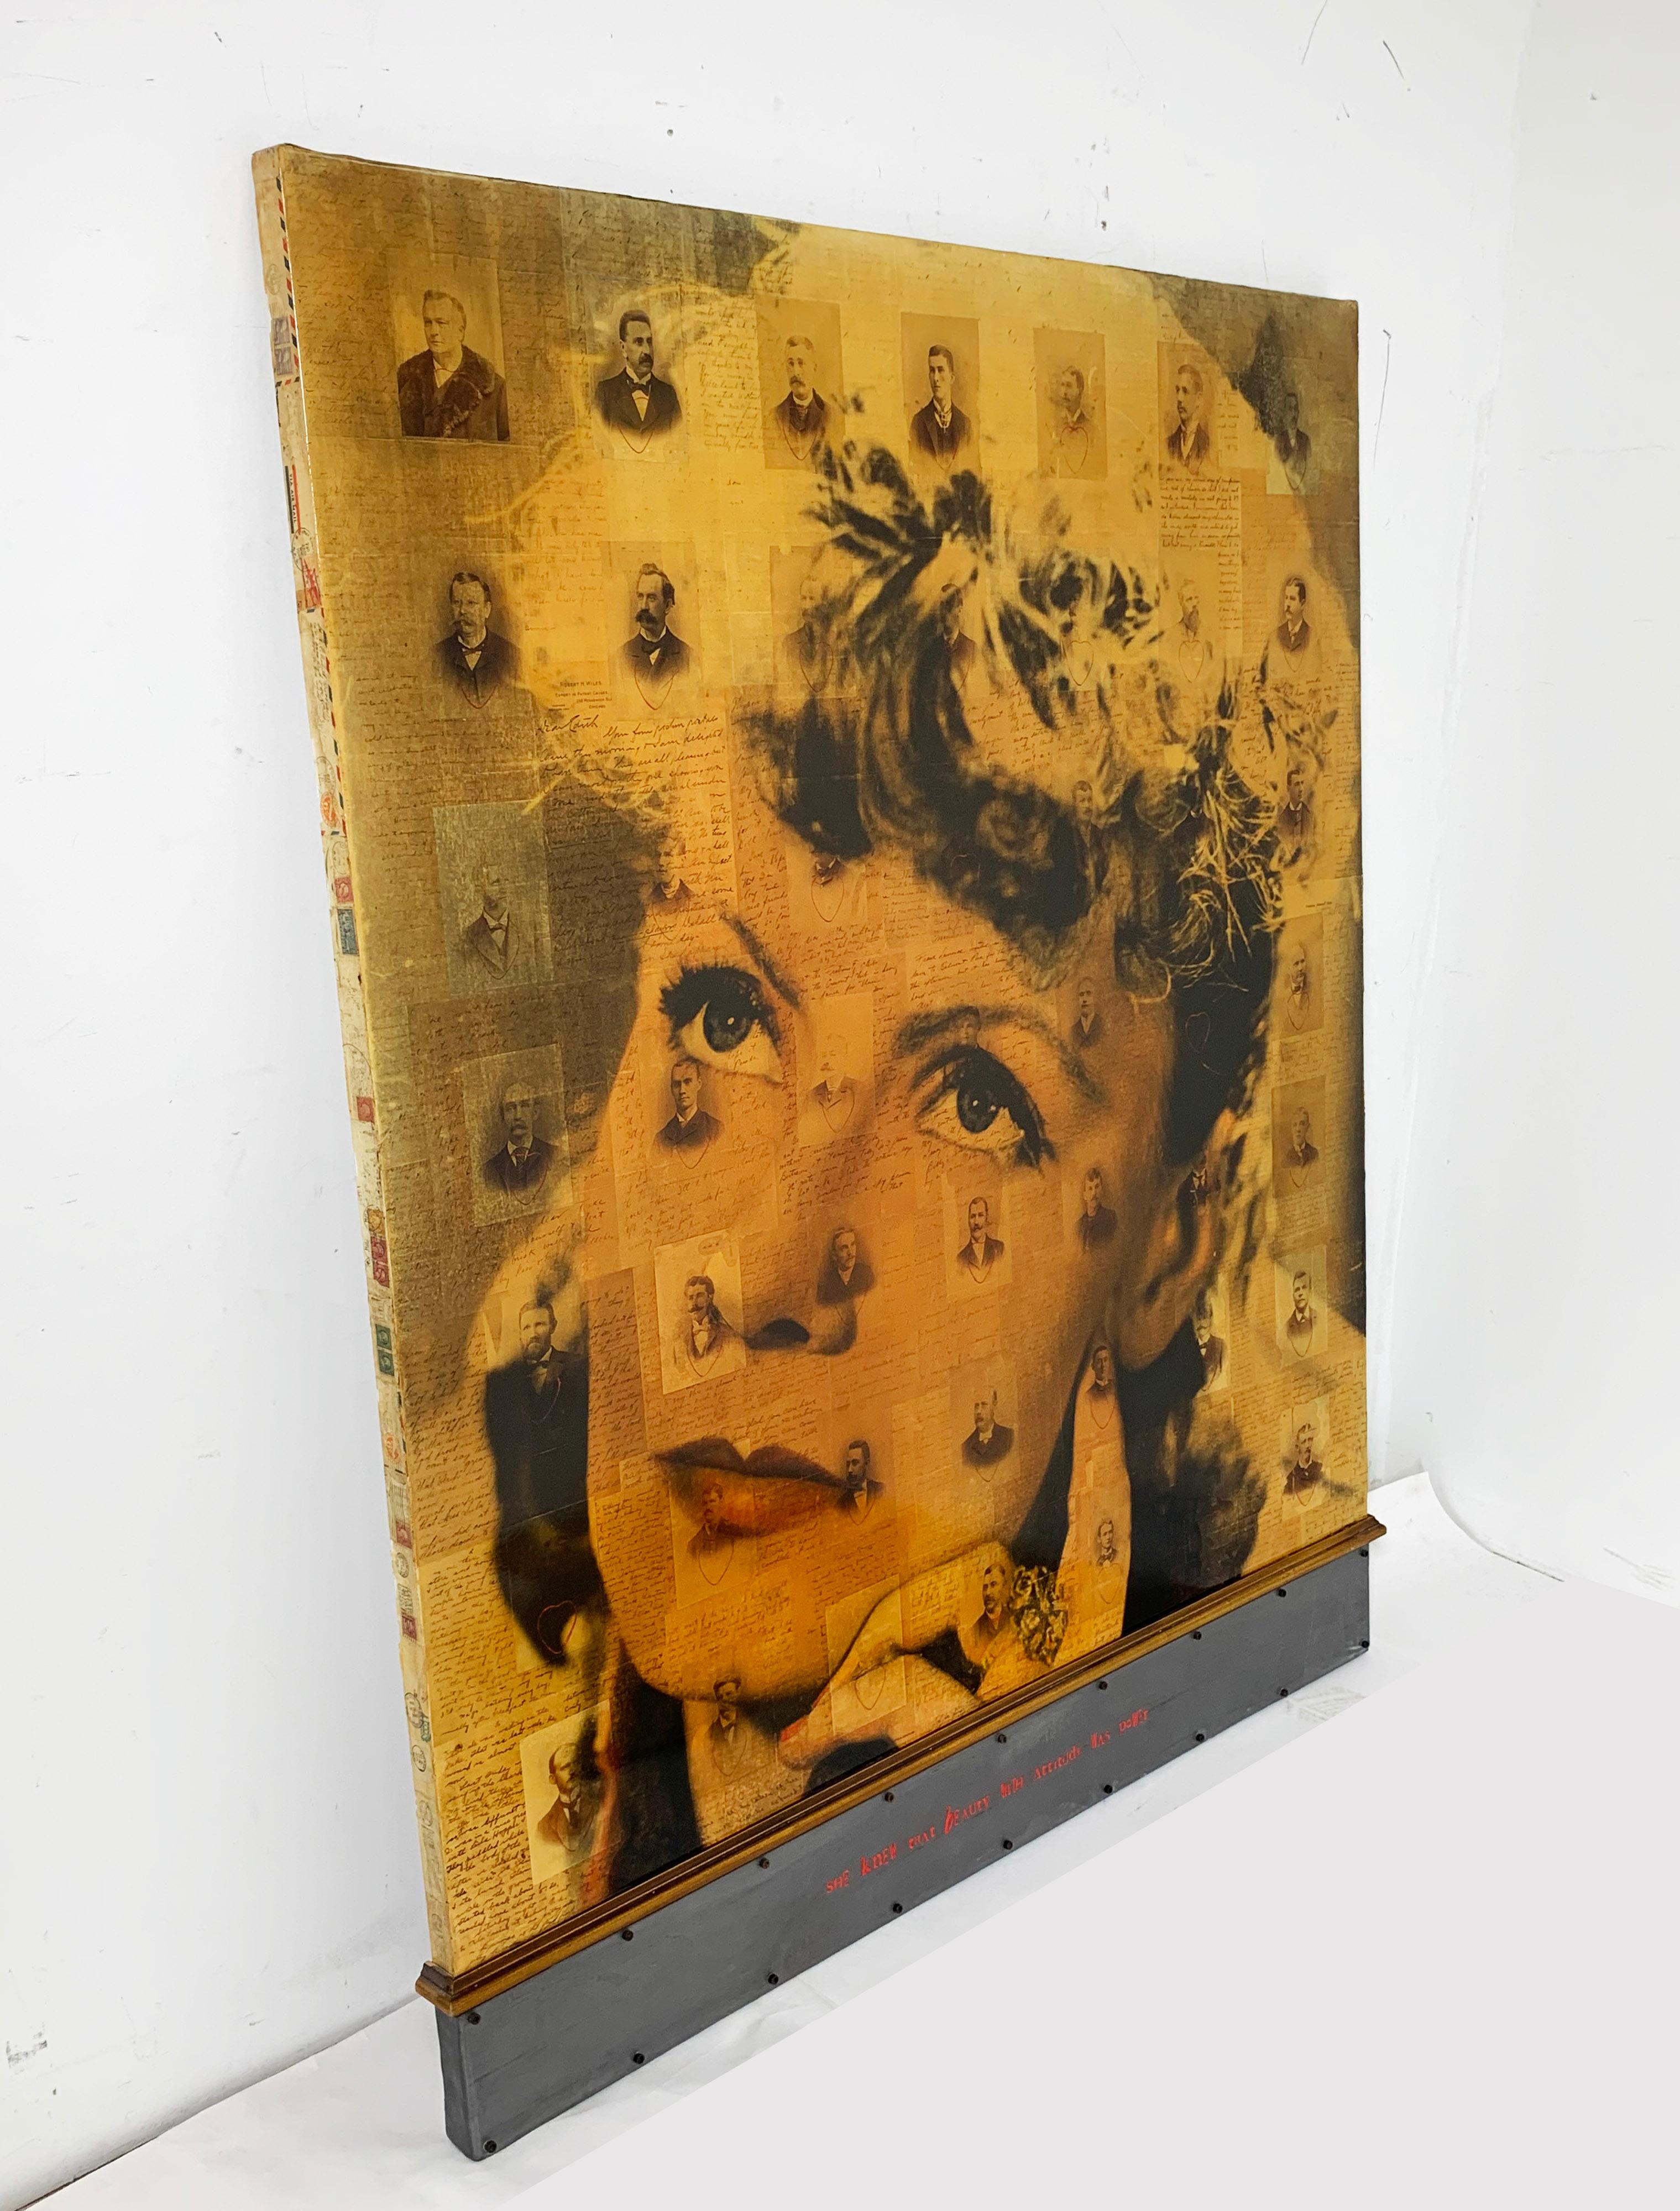 A mixed media work by noted artist and photographer Ben Freeman. This large scale work features a collage of antique gentleman’s photographs and authentic hand penned letters, overlayed upon an enlarged image of what appears to be an early image of